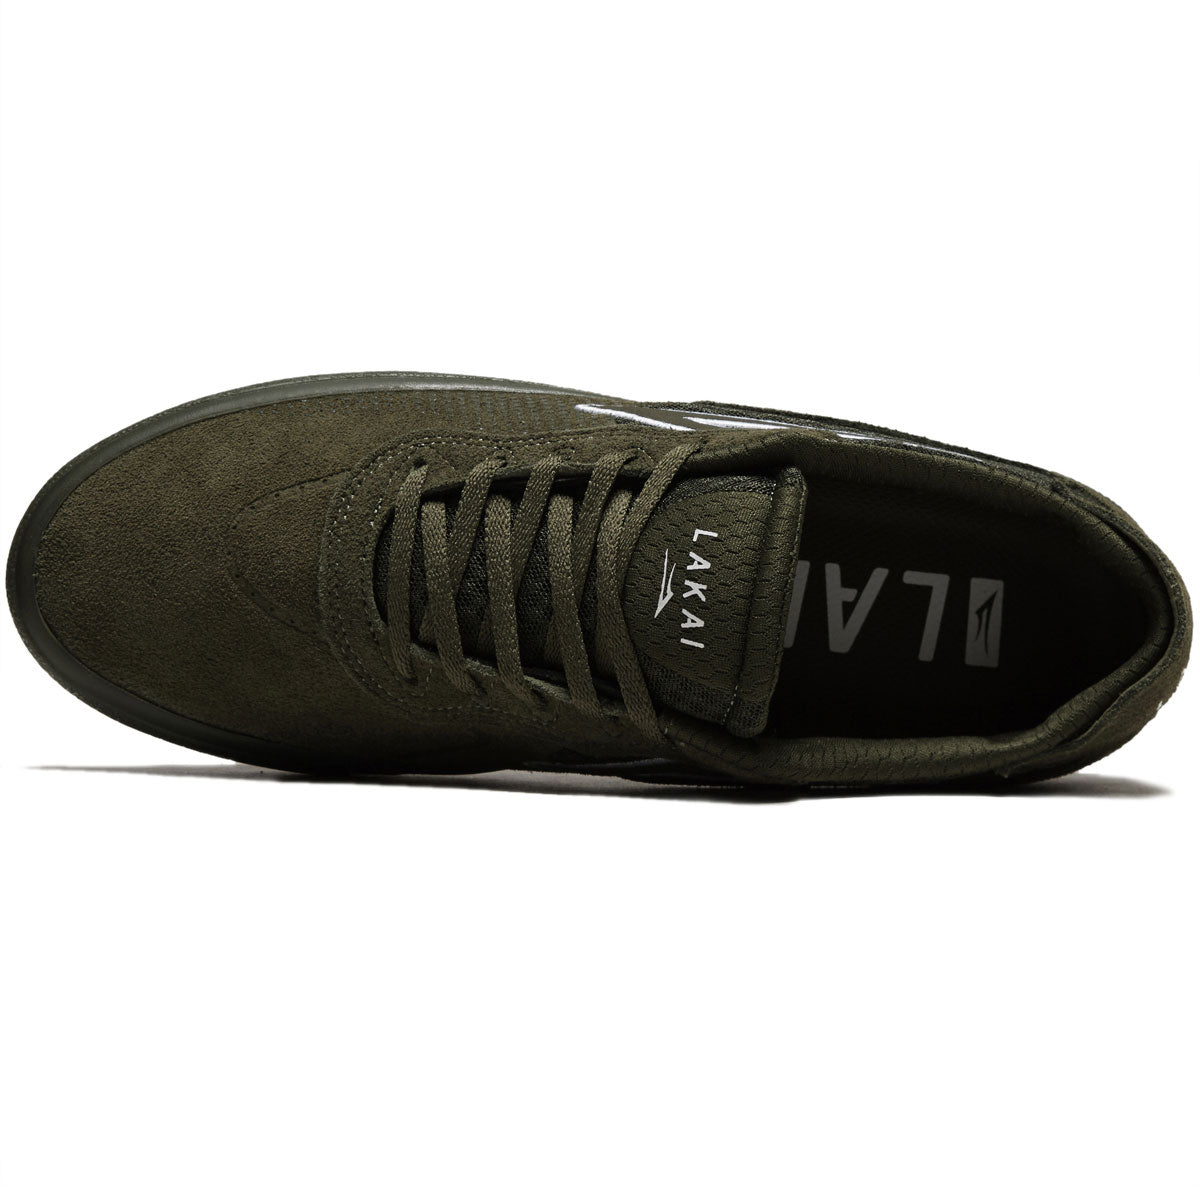 Lakai Essex Shoes - Chive Suede image 3